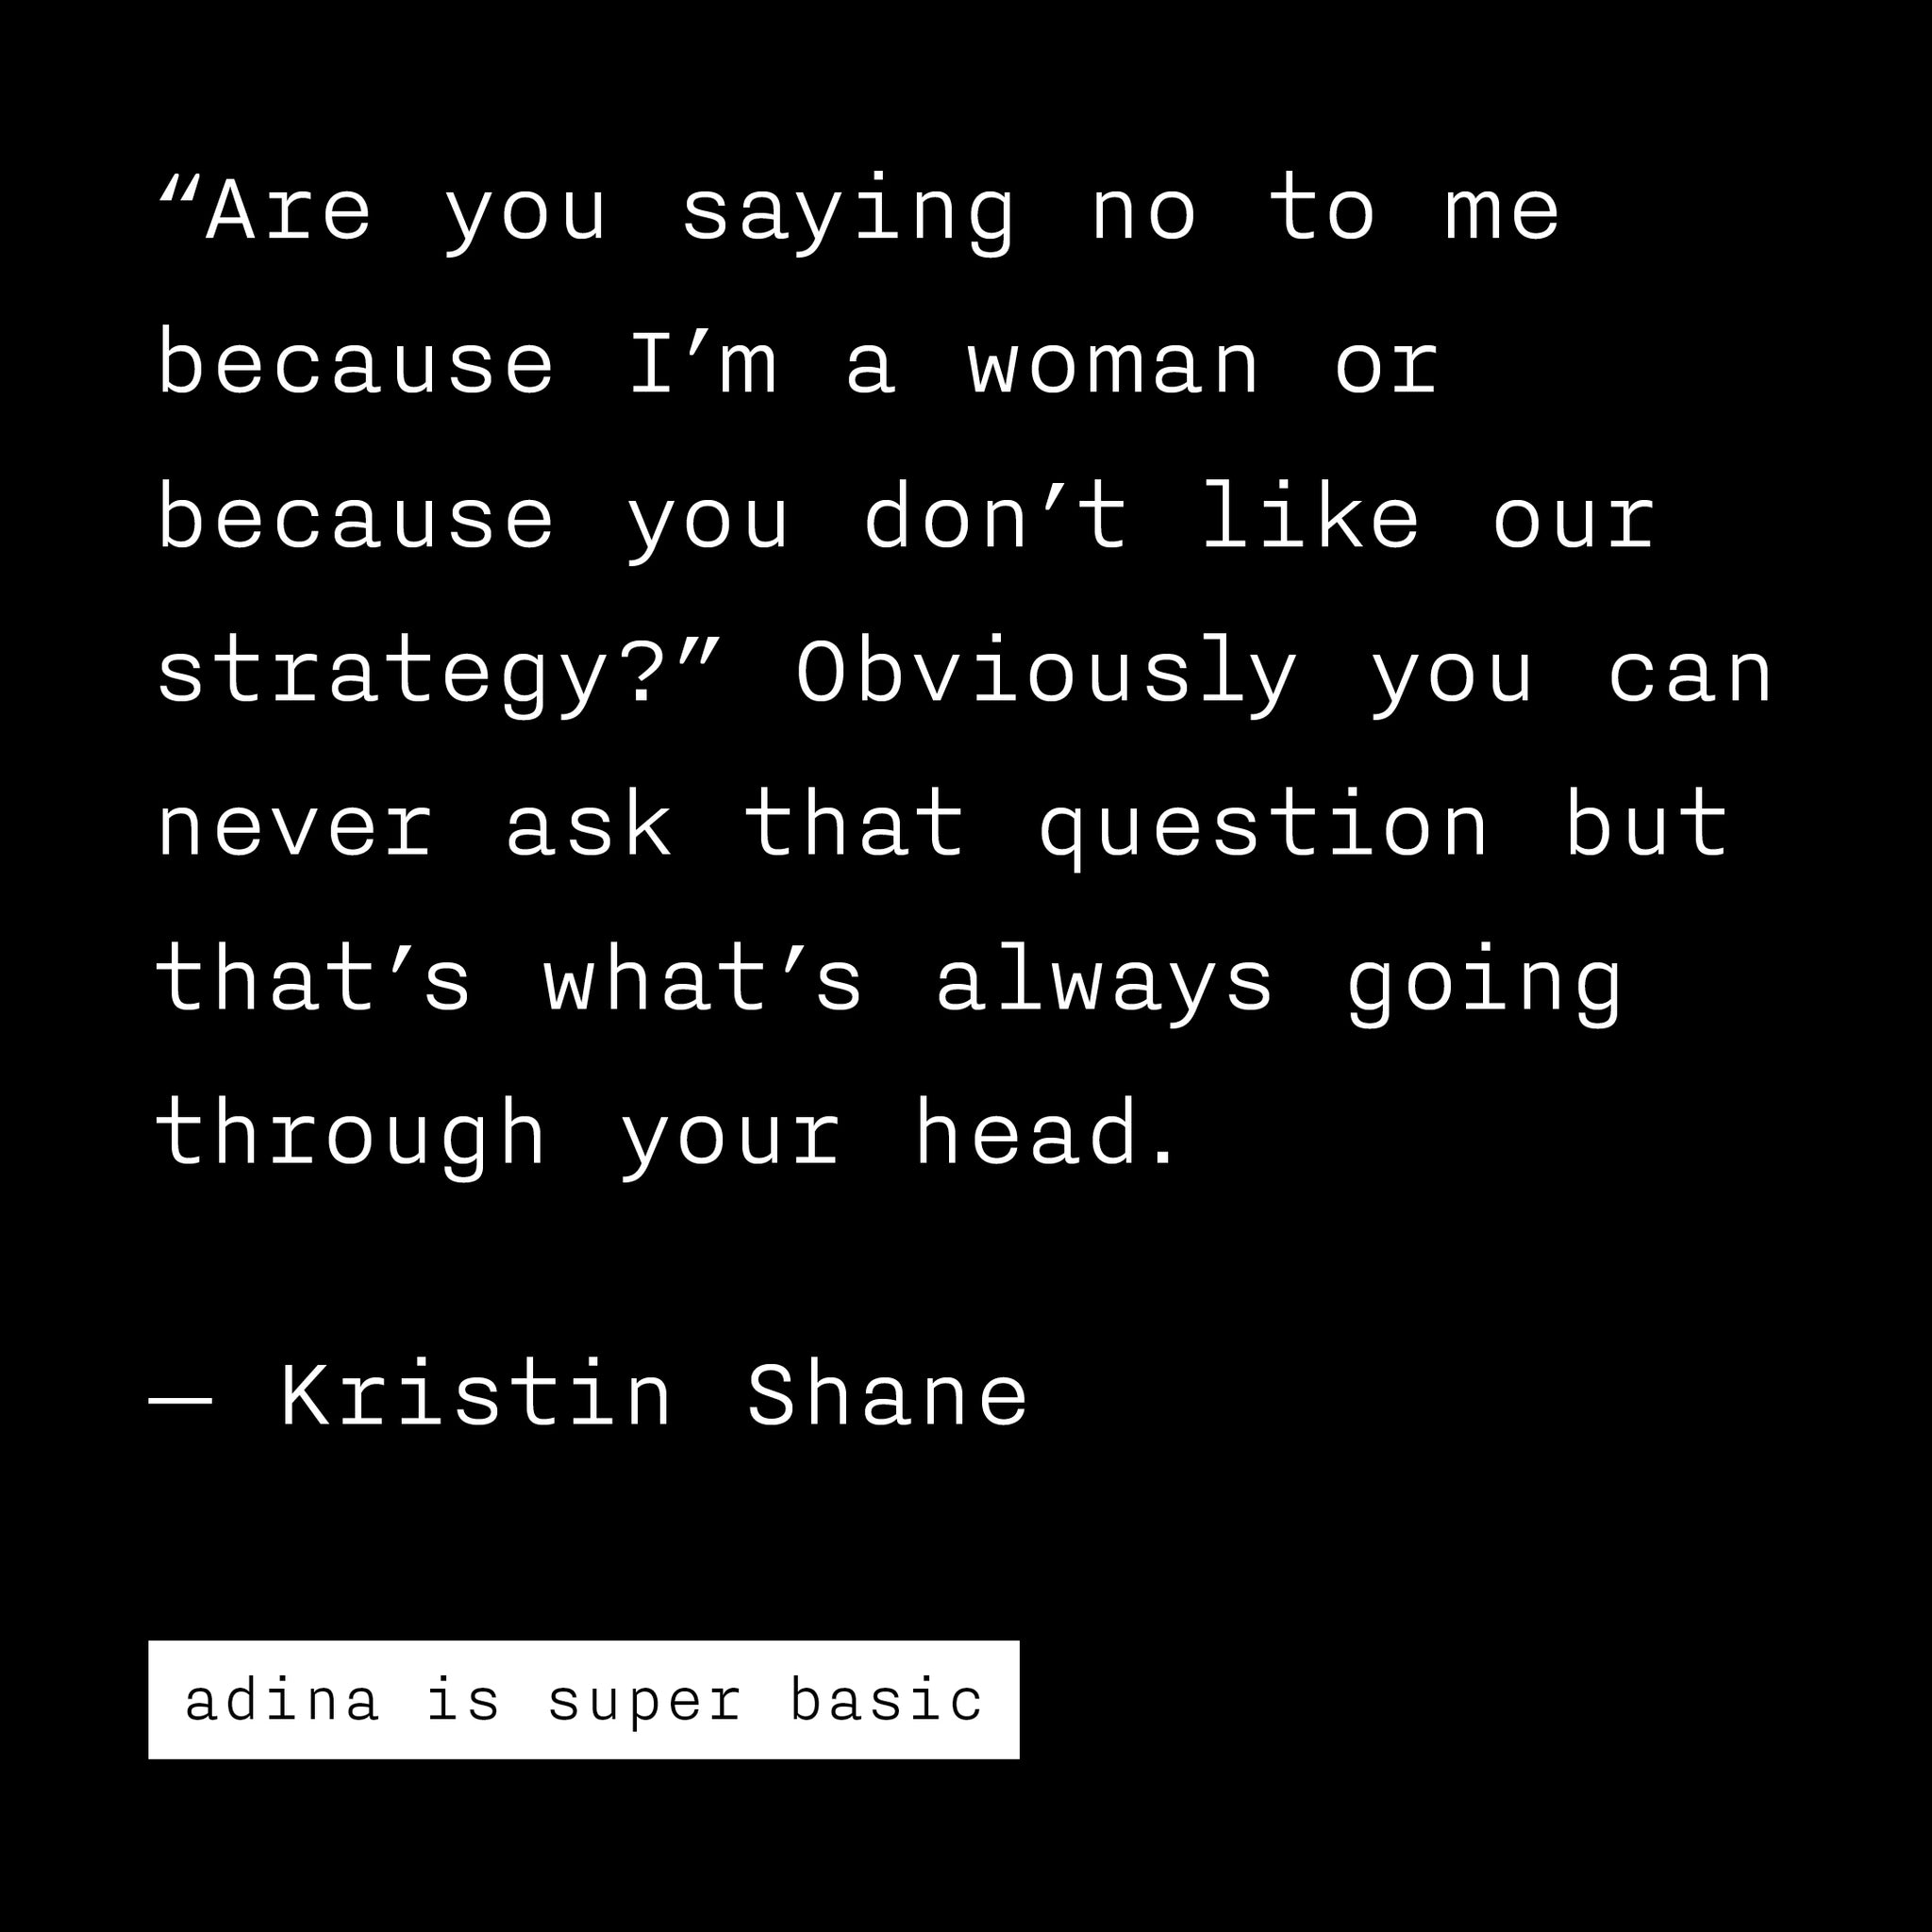 sexism with kristin shane